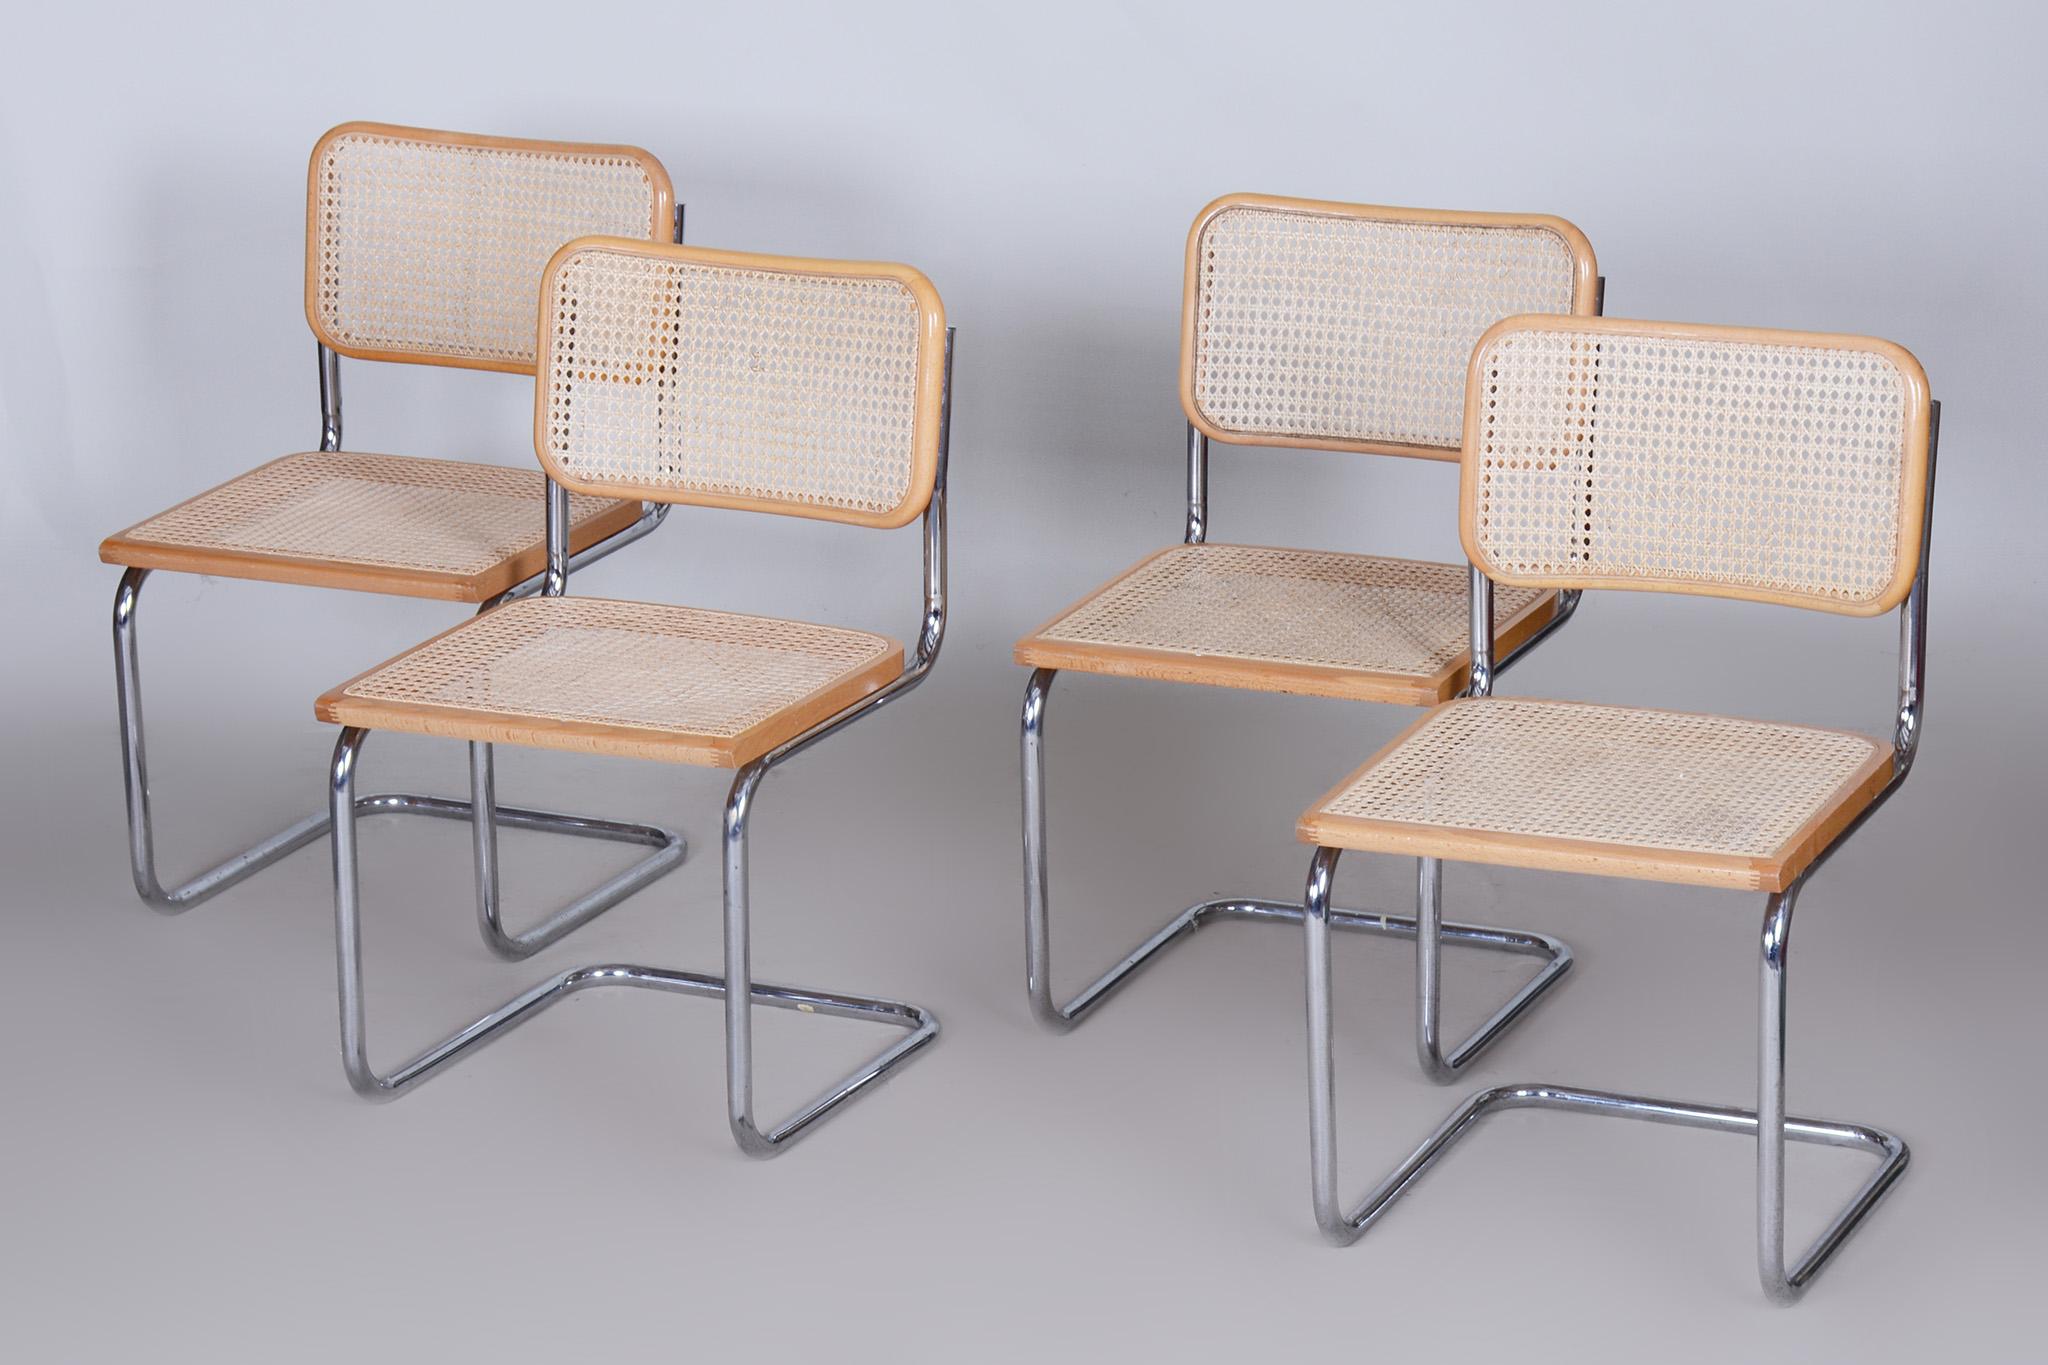 Set of Four Bauhaus Chairs, Chrome-Plated Steel, Rattan, Beech, Italy, 1960s For Sale 2